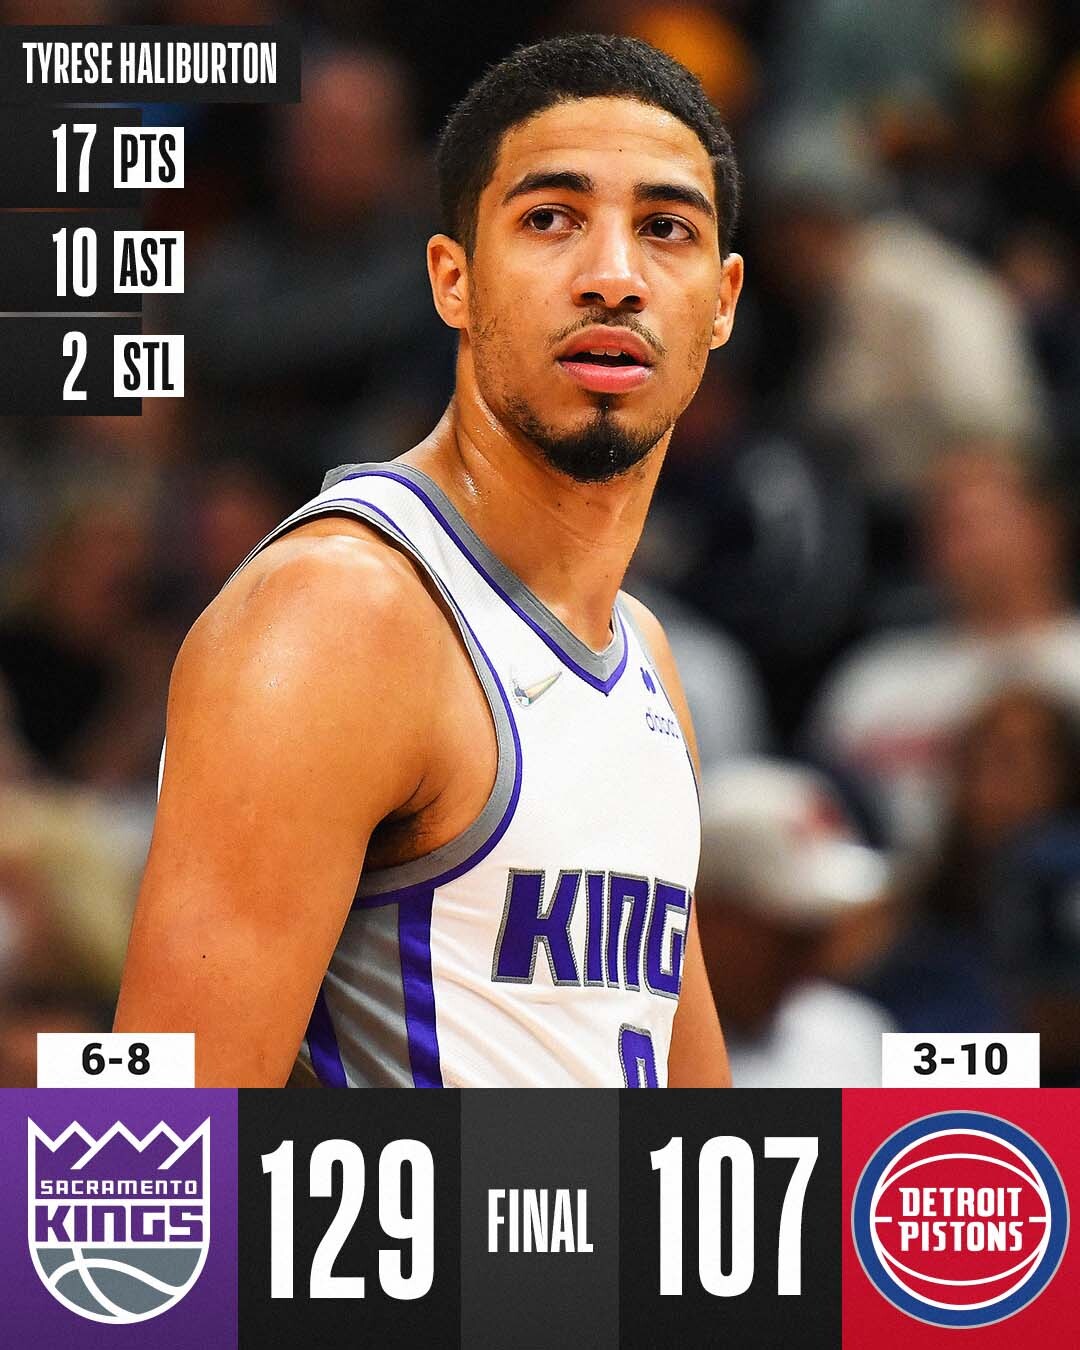 Tyrese Haliburton drops a double-double on his former team 👑➡️🏎